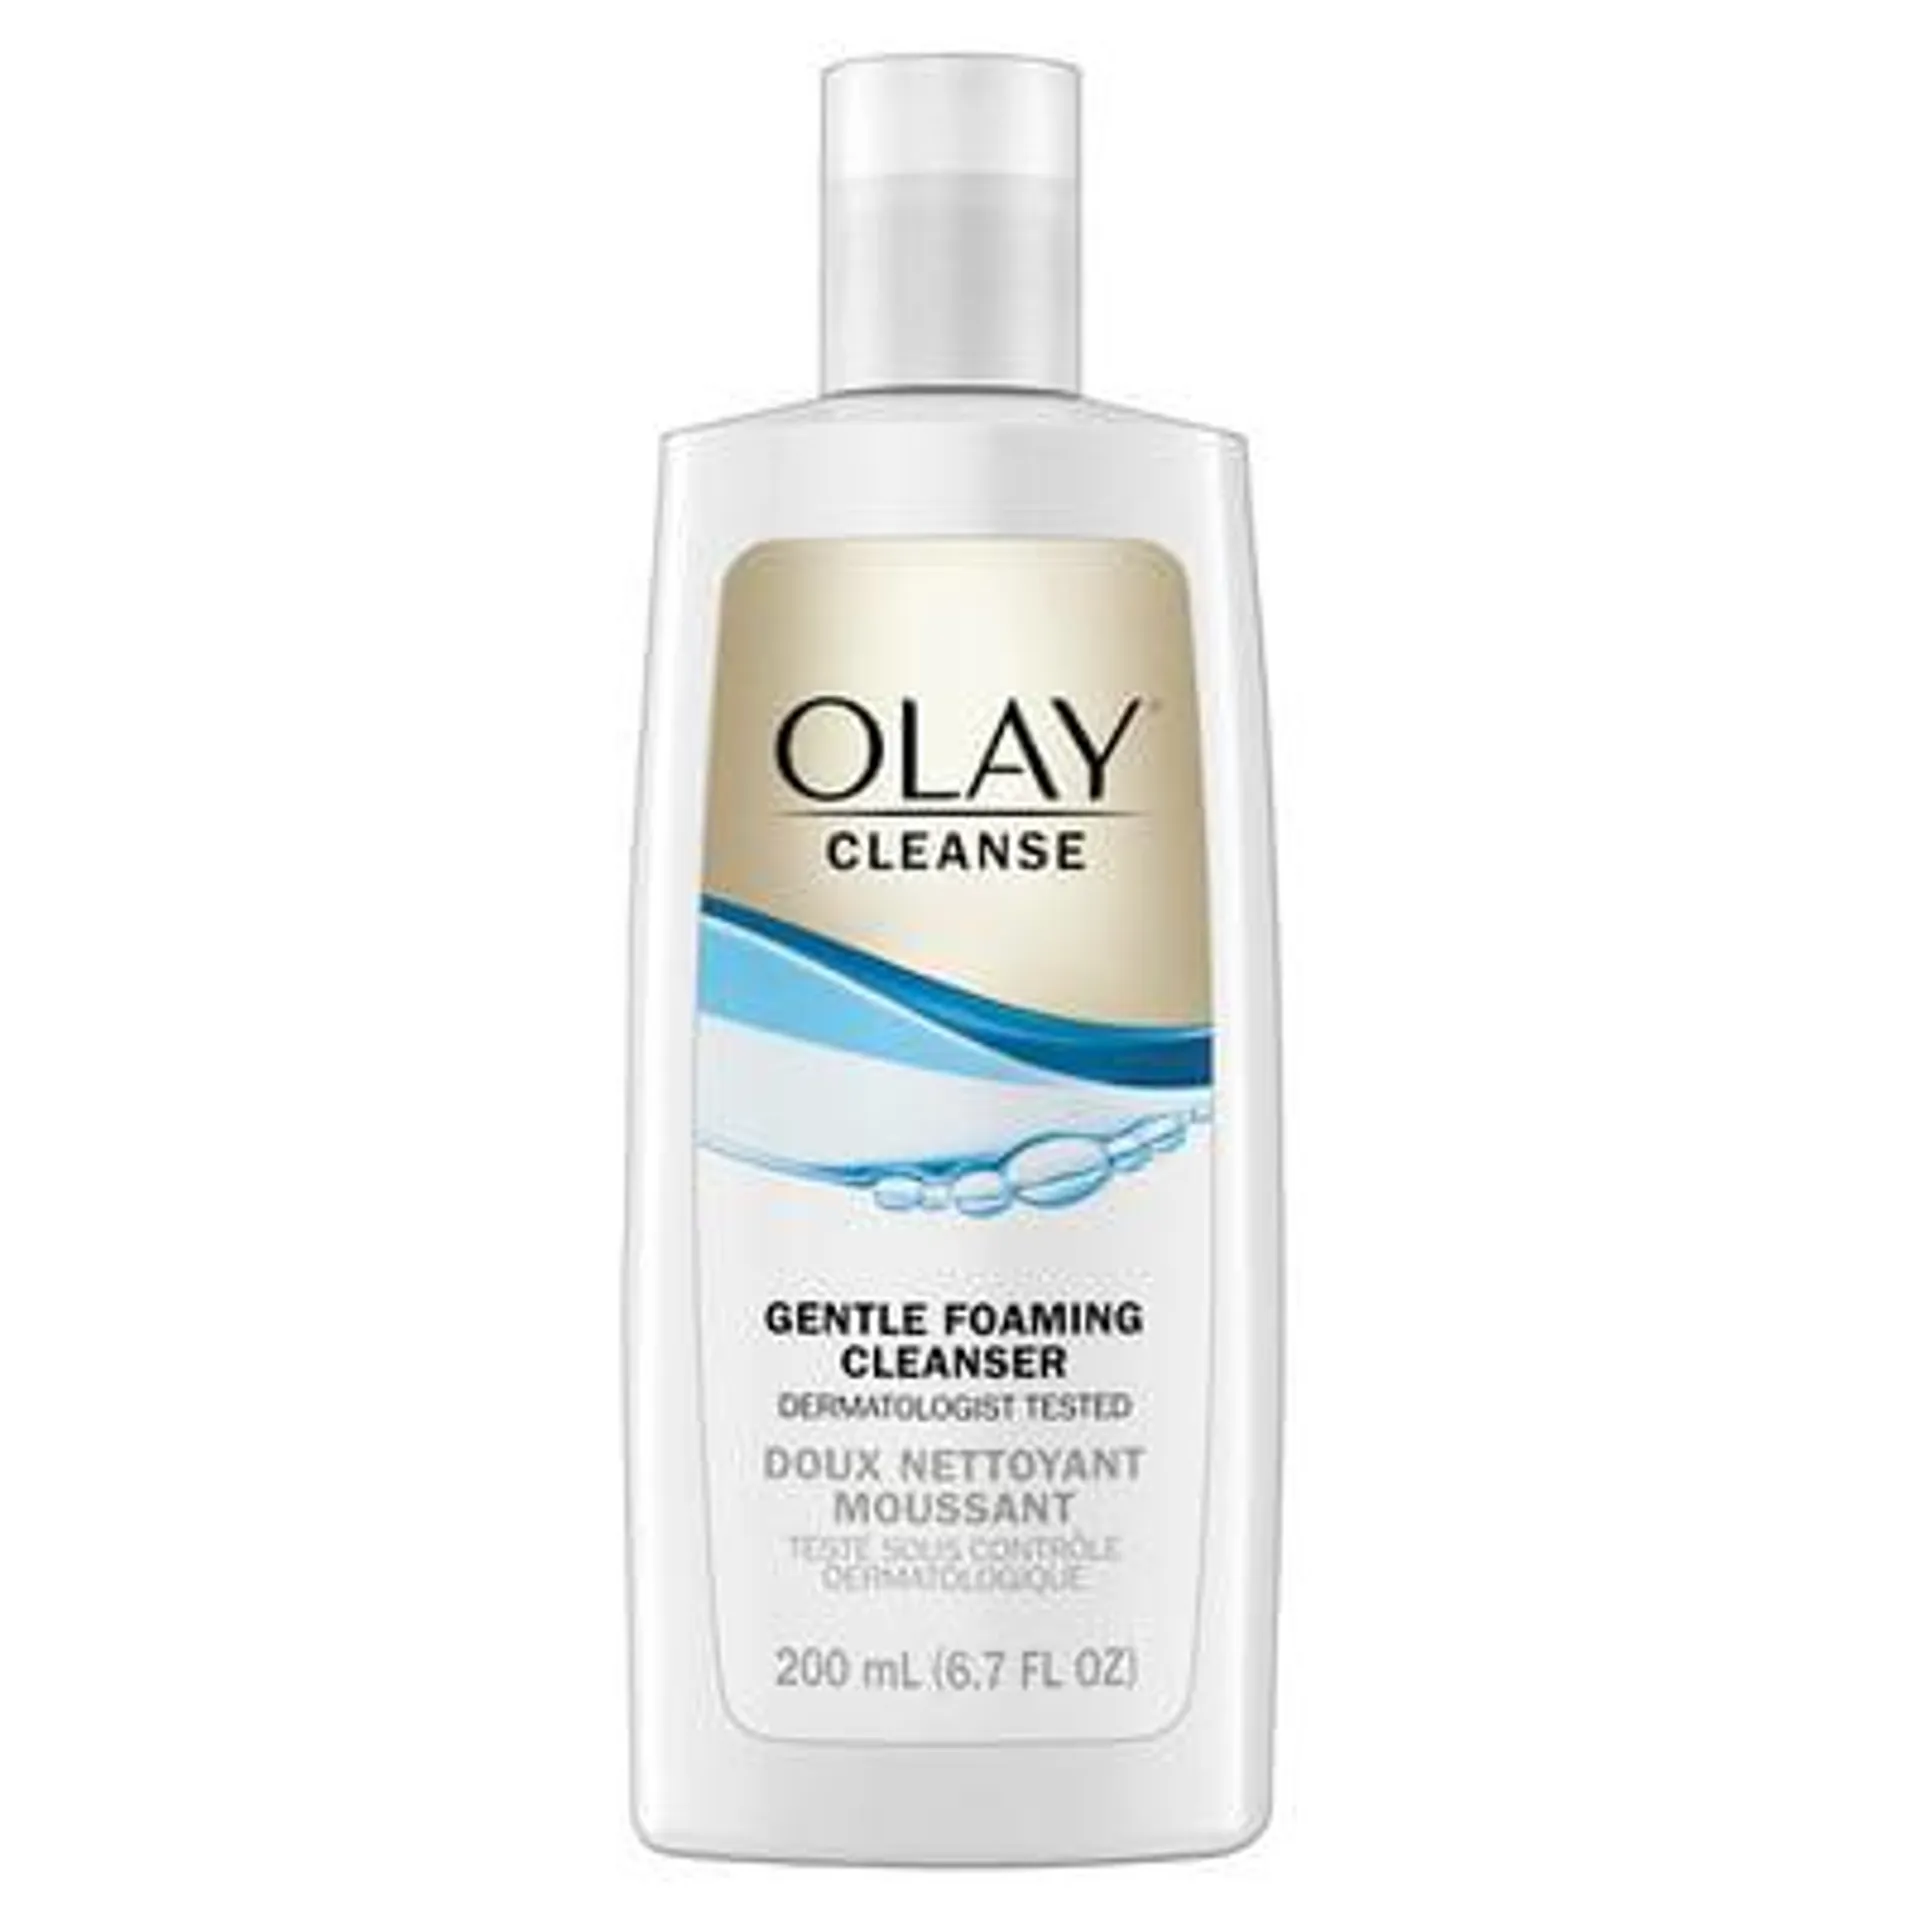 Olay, Cleanse - Gentle Foaming Face Cleanser, 6.7 fl oz